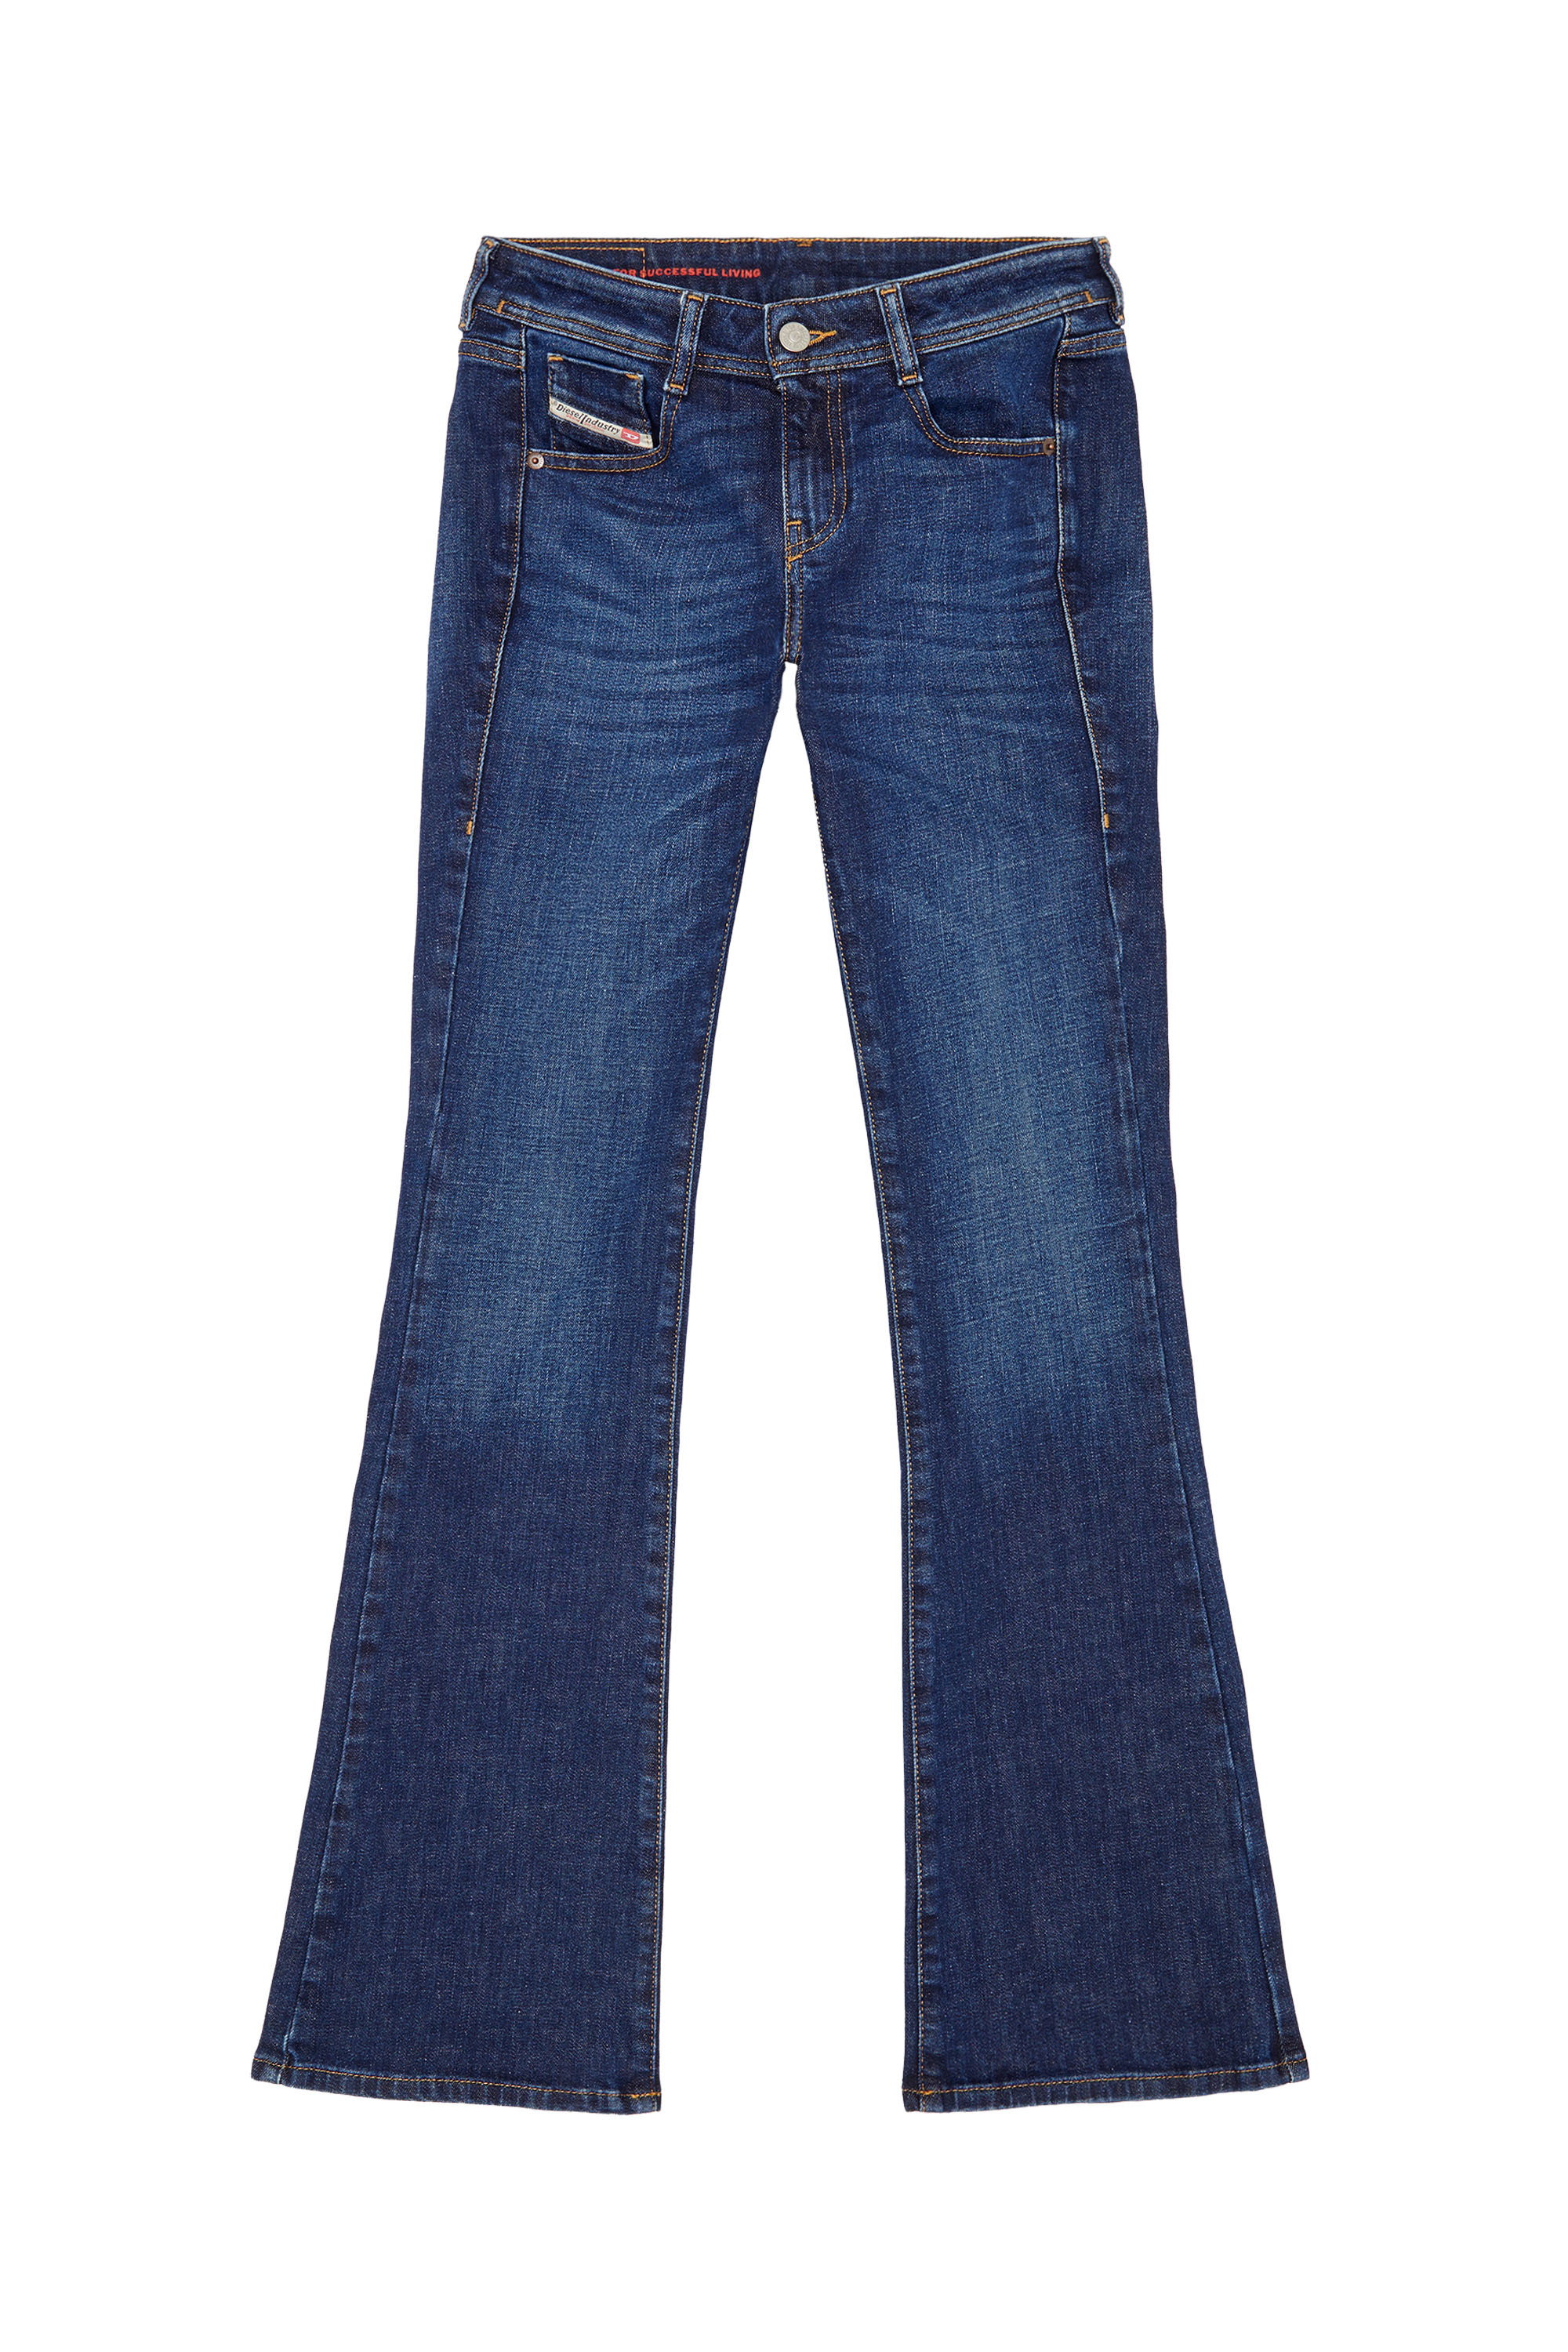 Bootcut and Flare Jeans 1969 D-Ebbey 09B90, Blu Scuro - Jeans